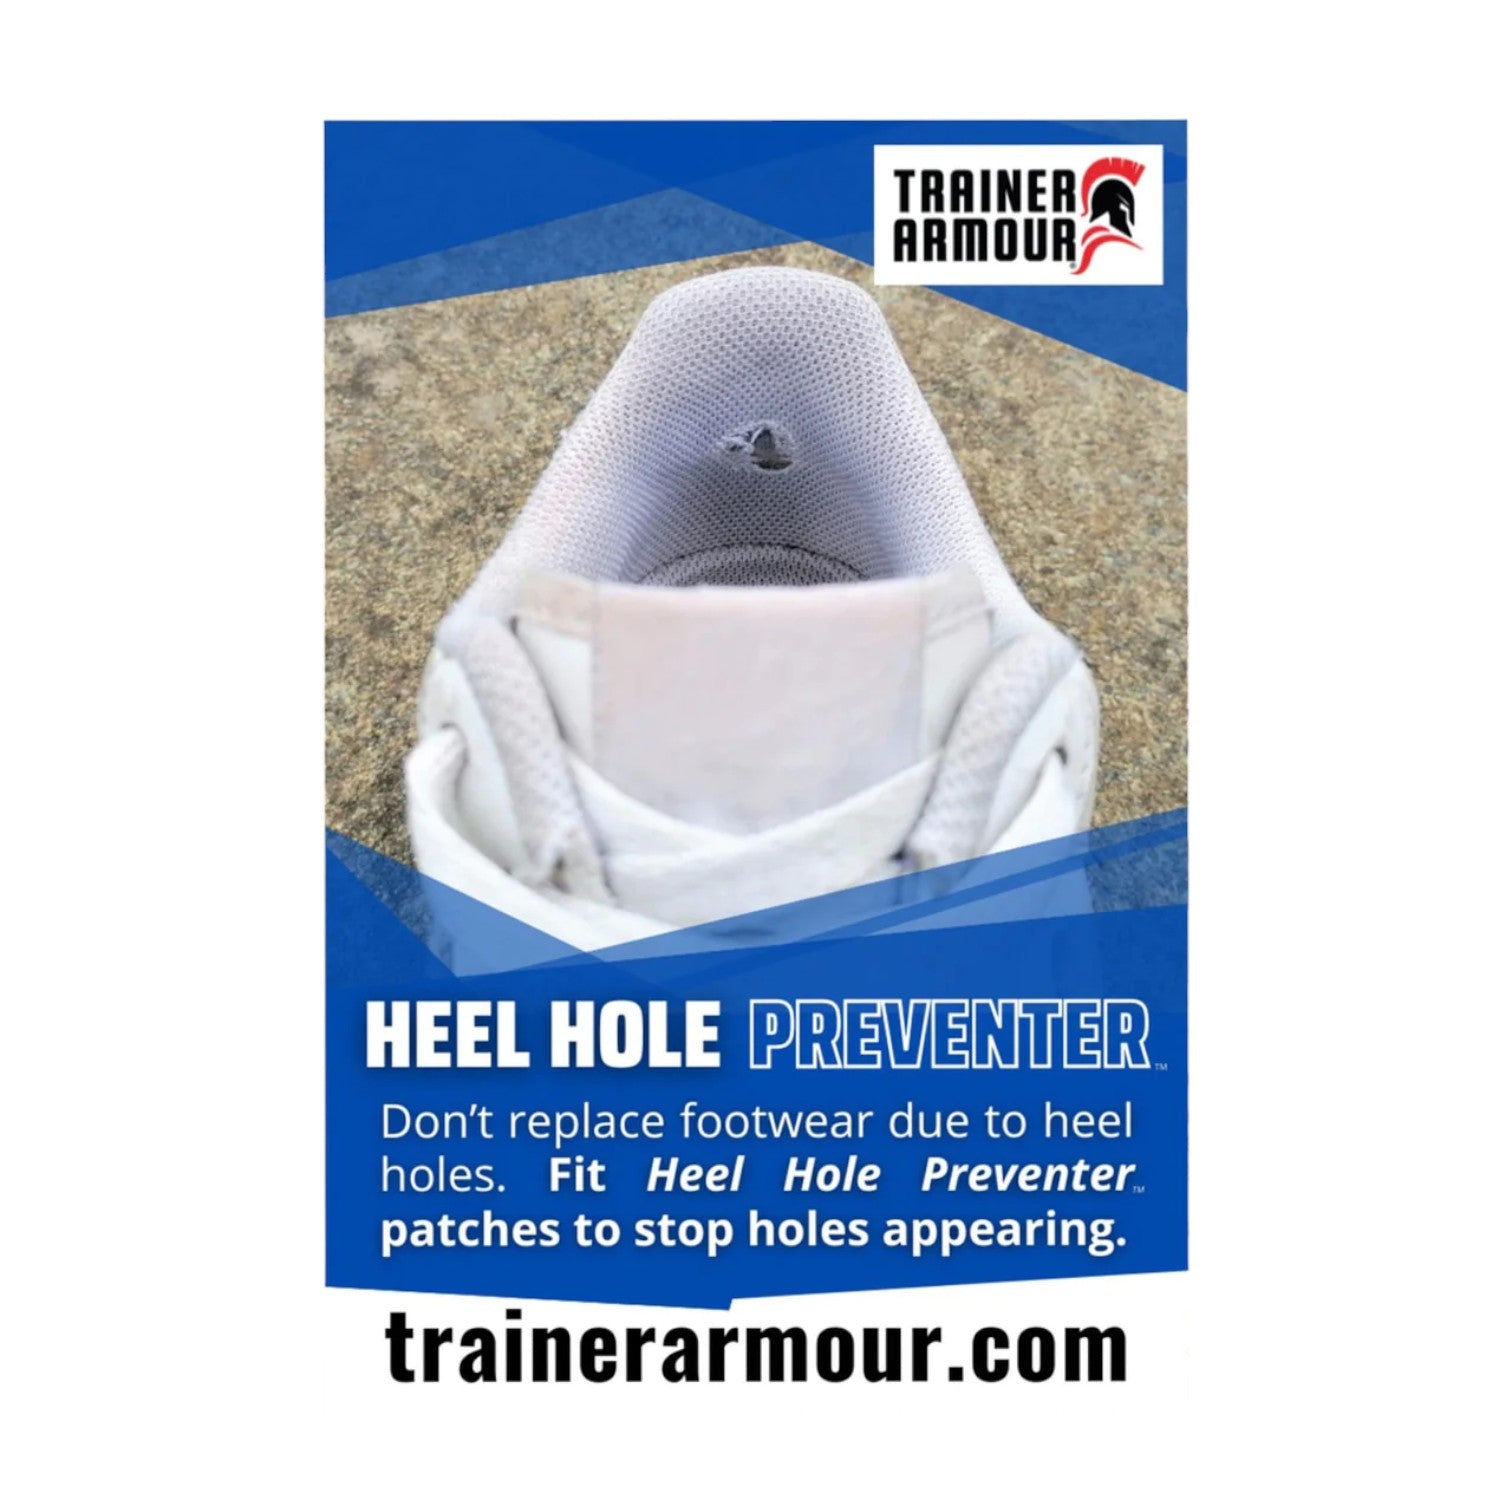 Trainer Armour Heel Hole Preventer 1 Pack